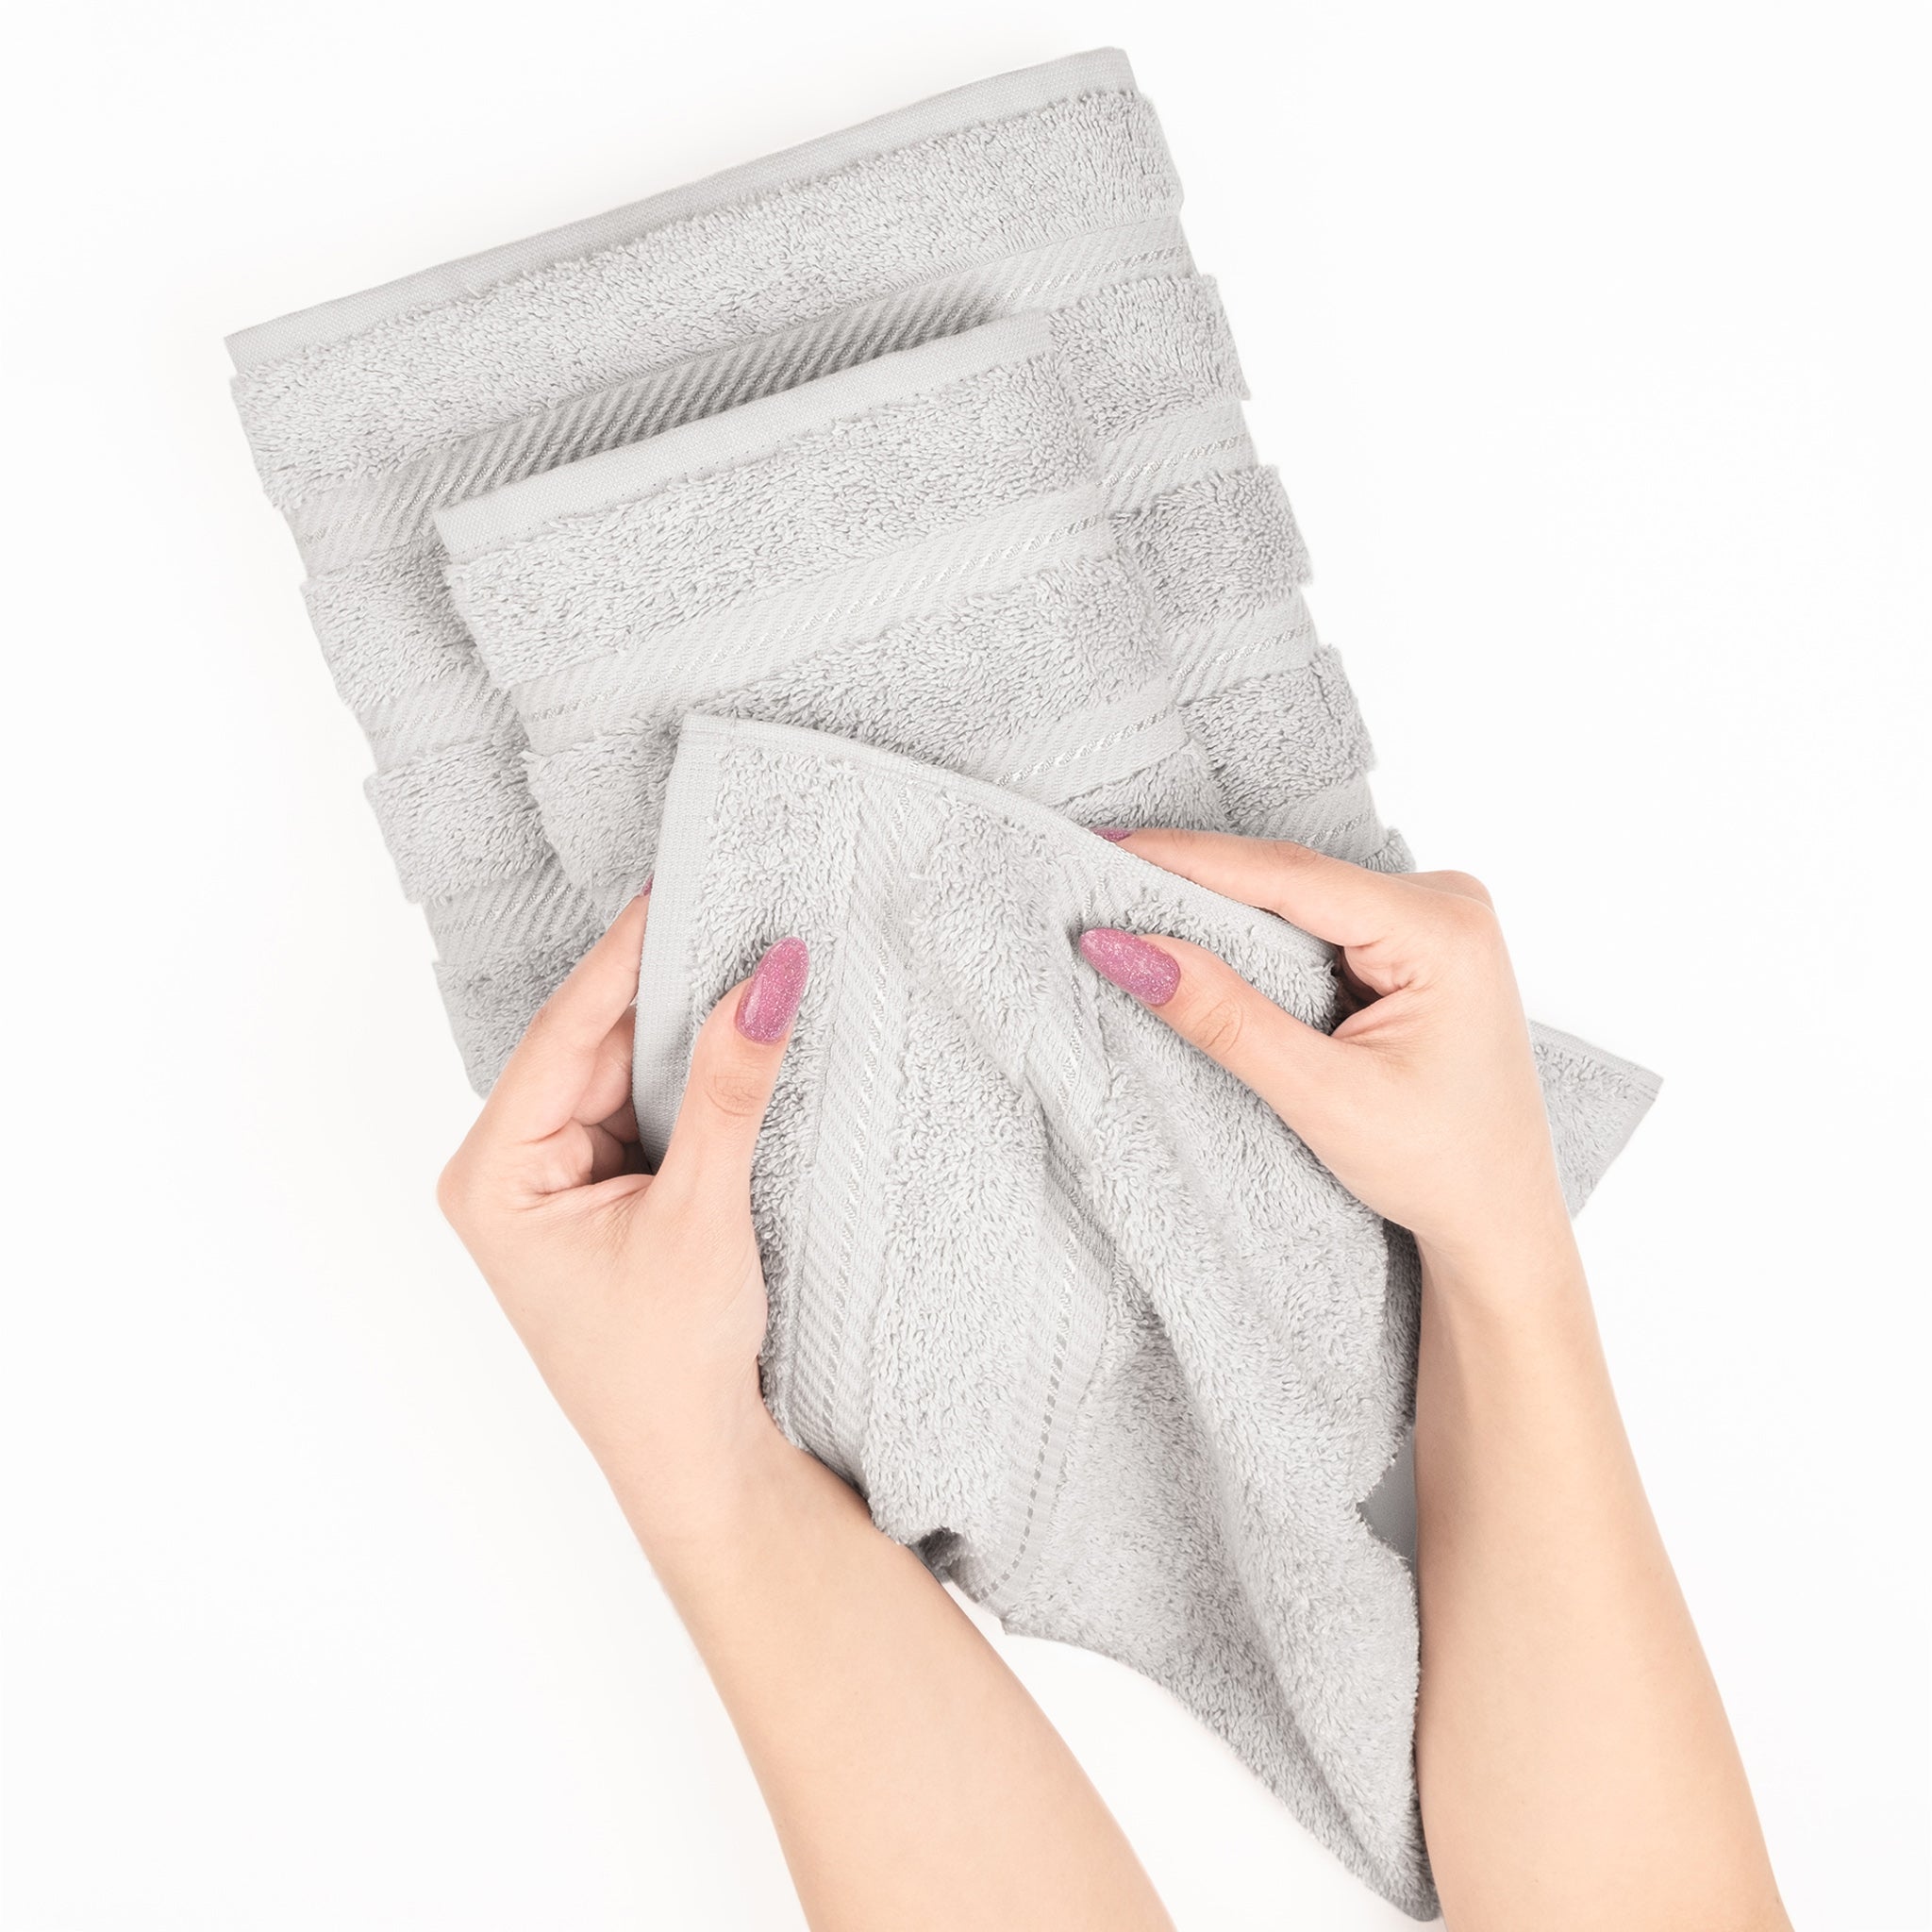 American Soft Linen 100% Turkish Cotton 4 Pack Hand Towel Set silver-gray-5